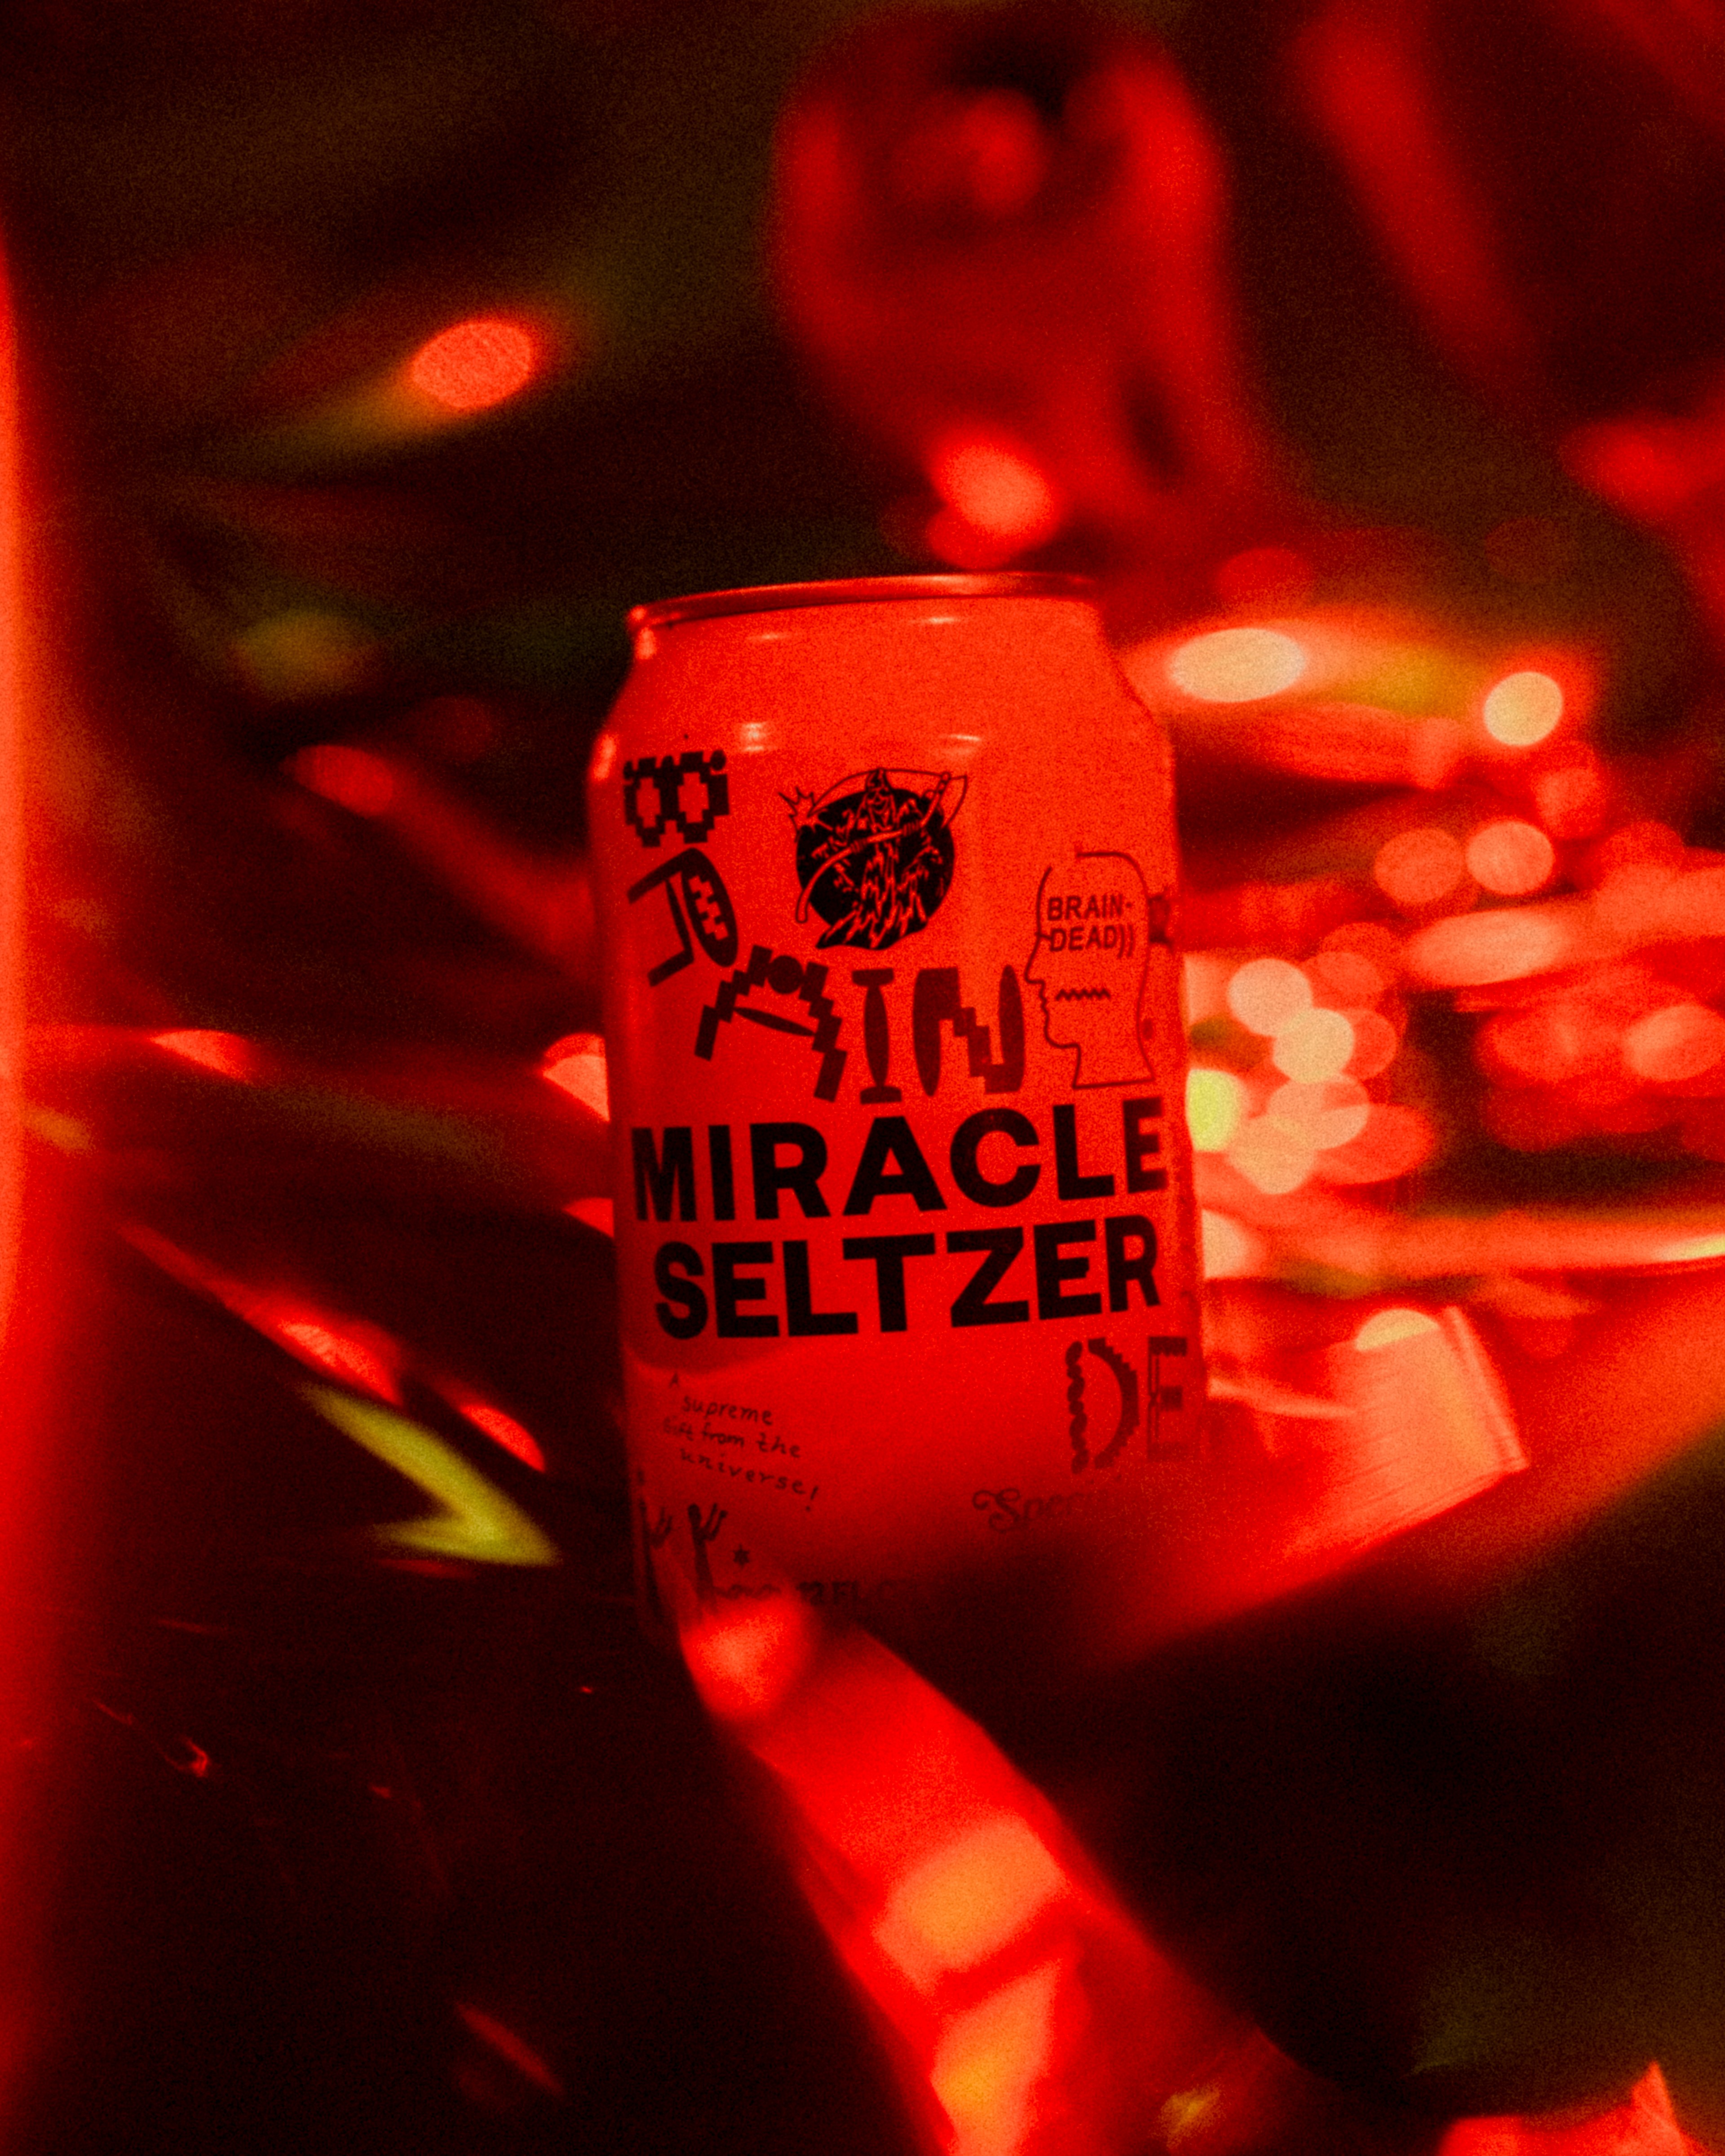 photo of miracle selzter can under a red light